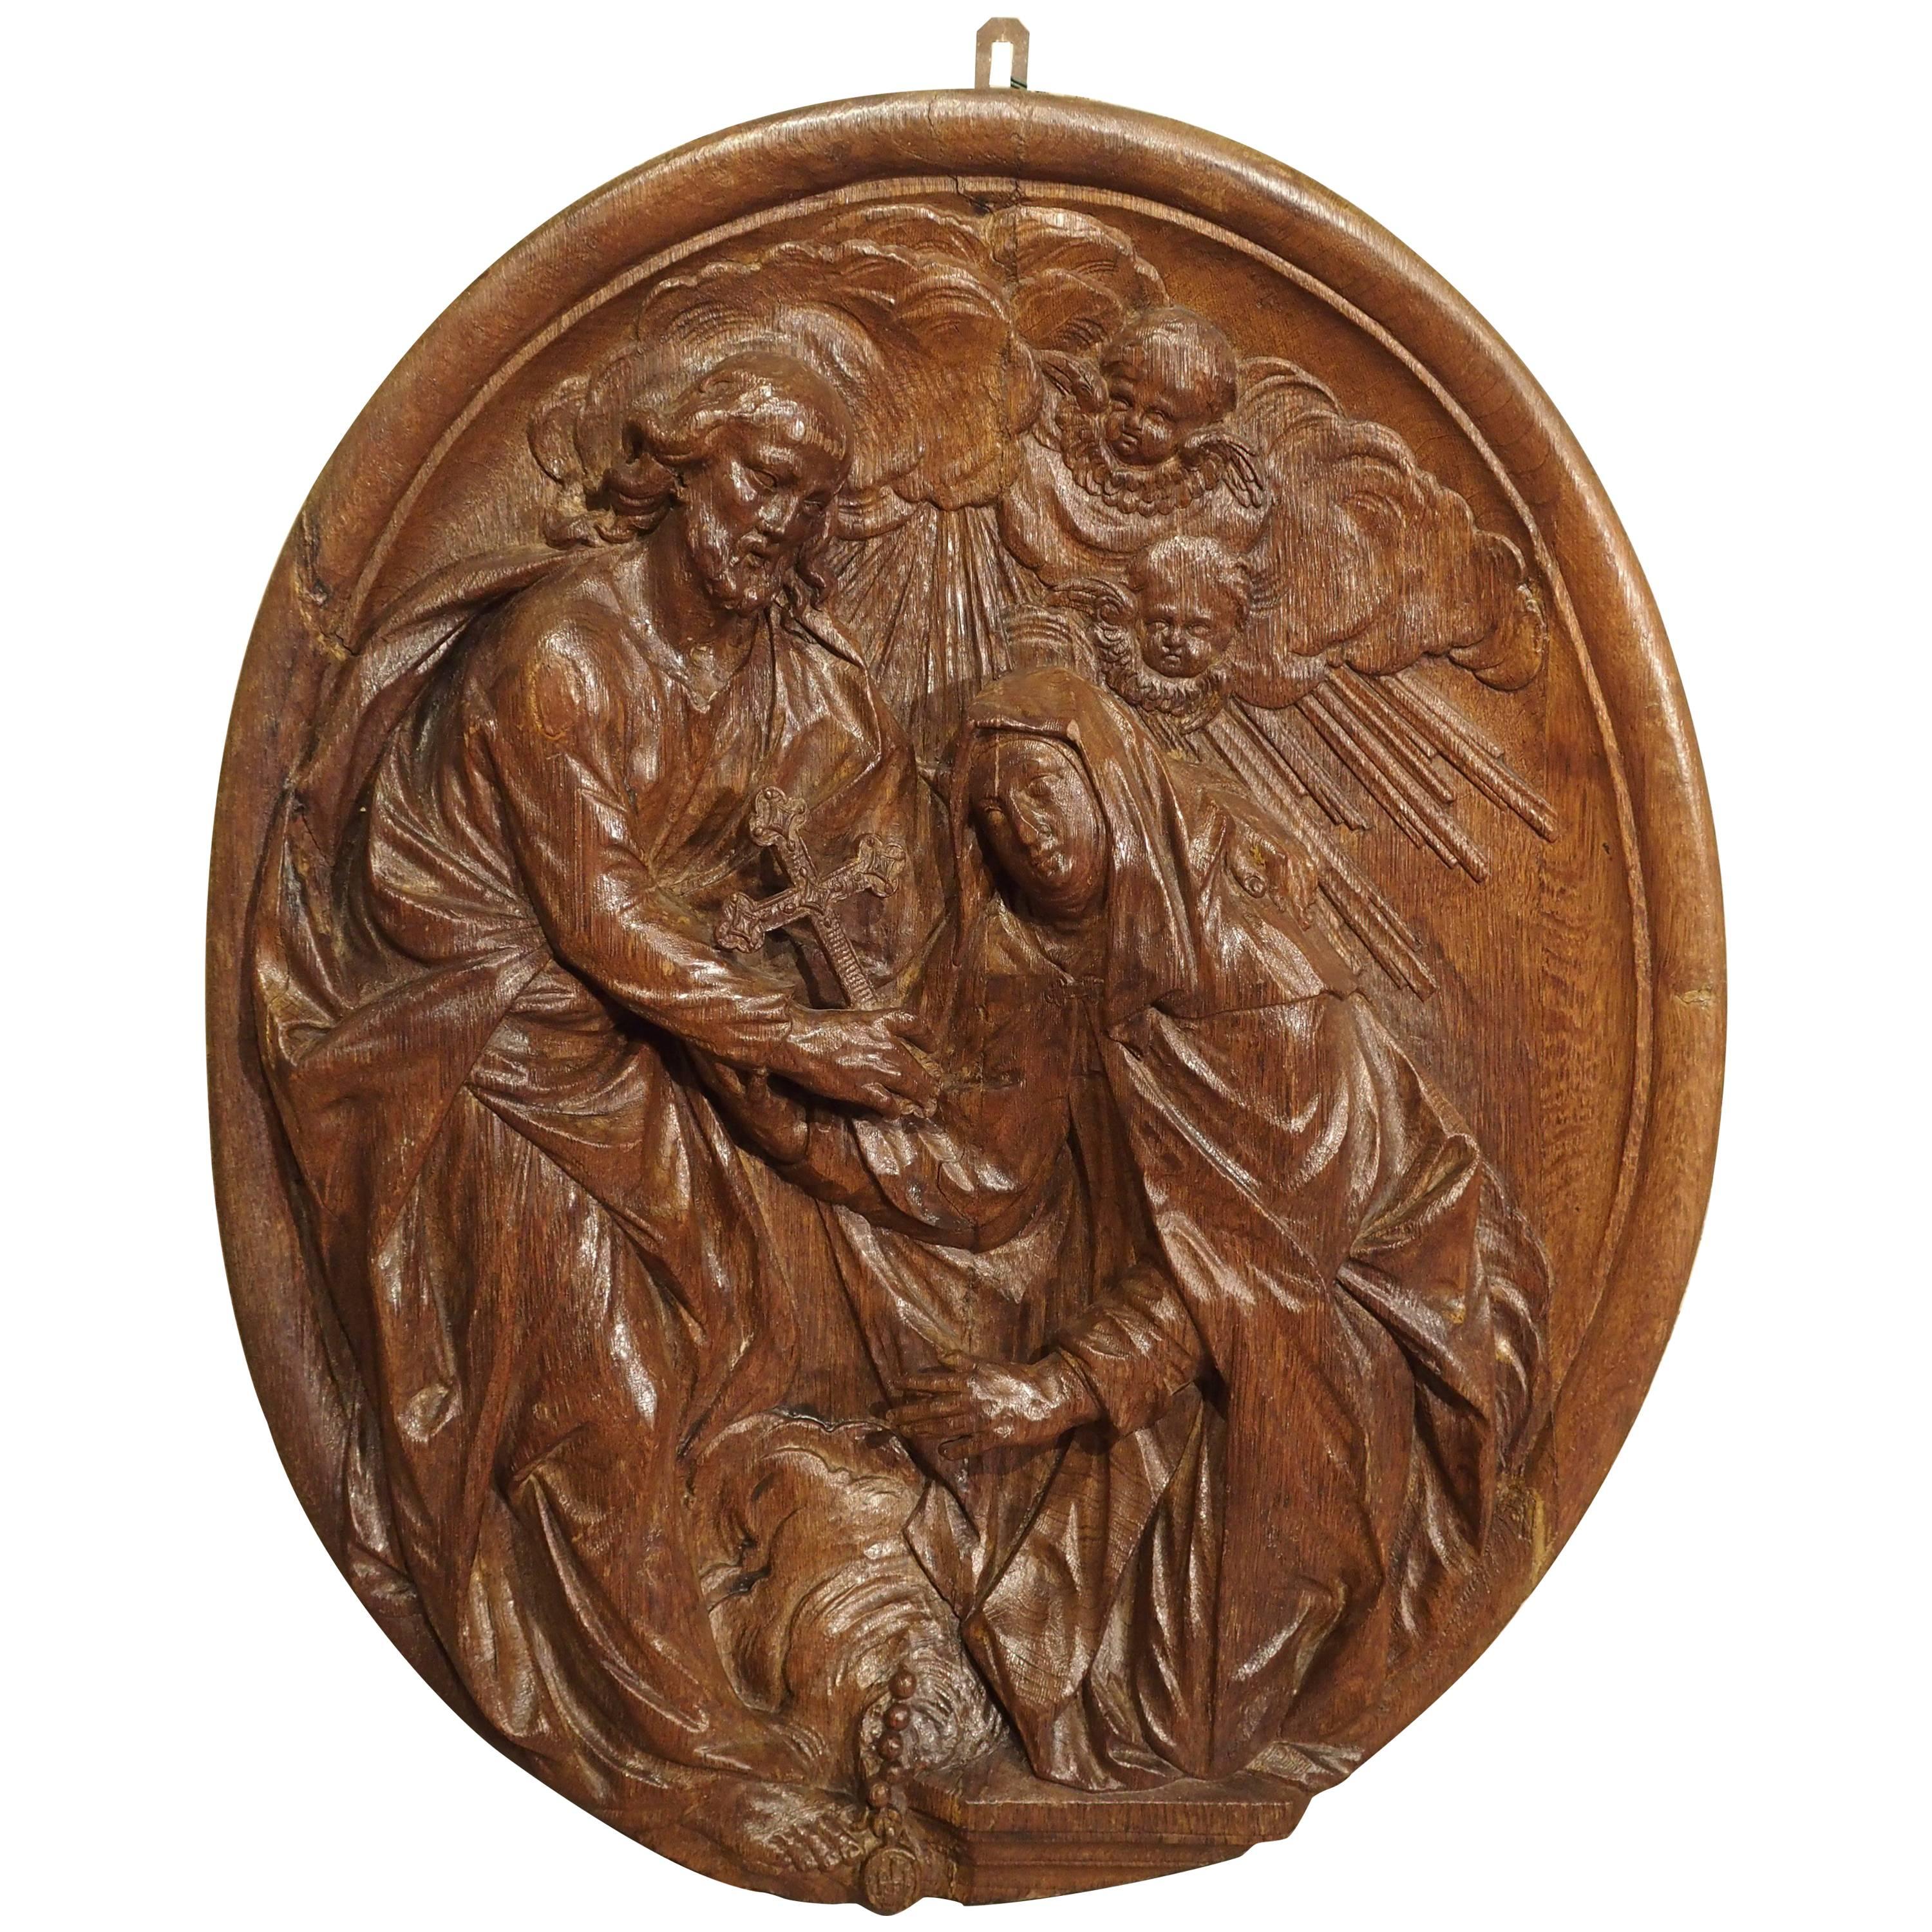 Carved 18th Century Oval Wooden Religious Plaque from France